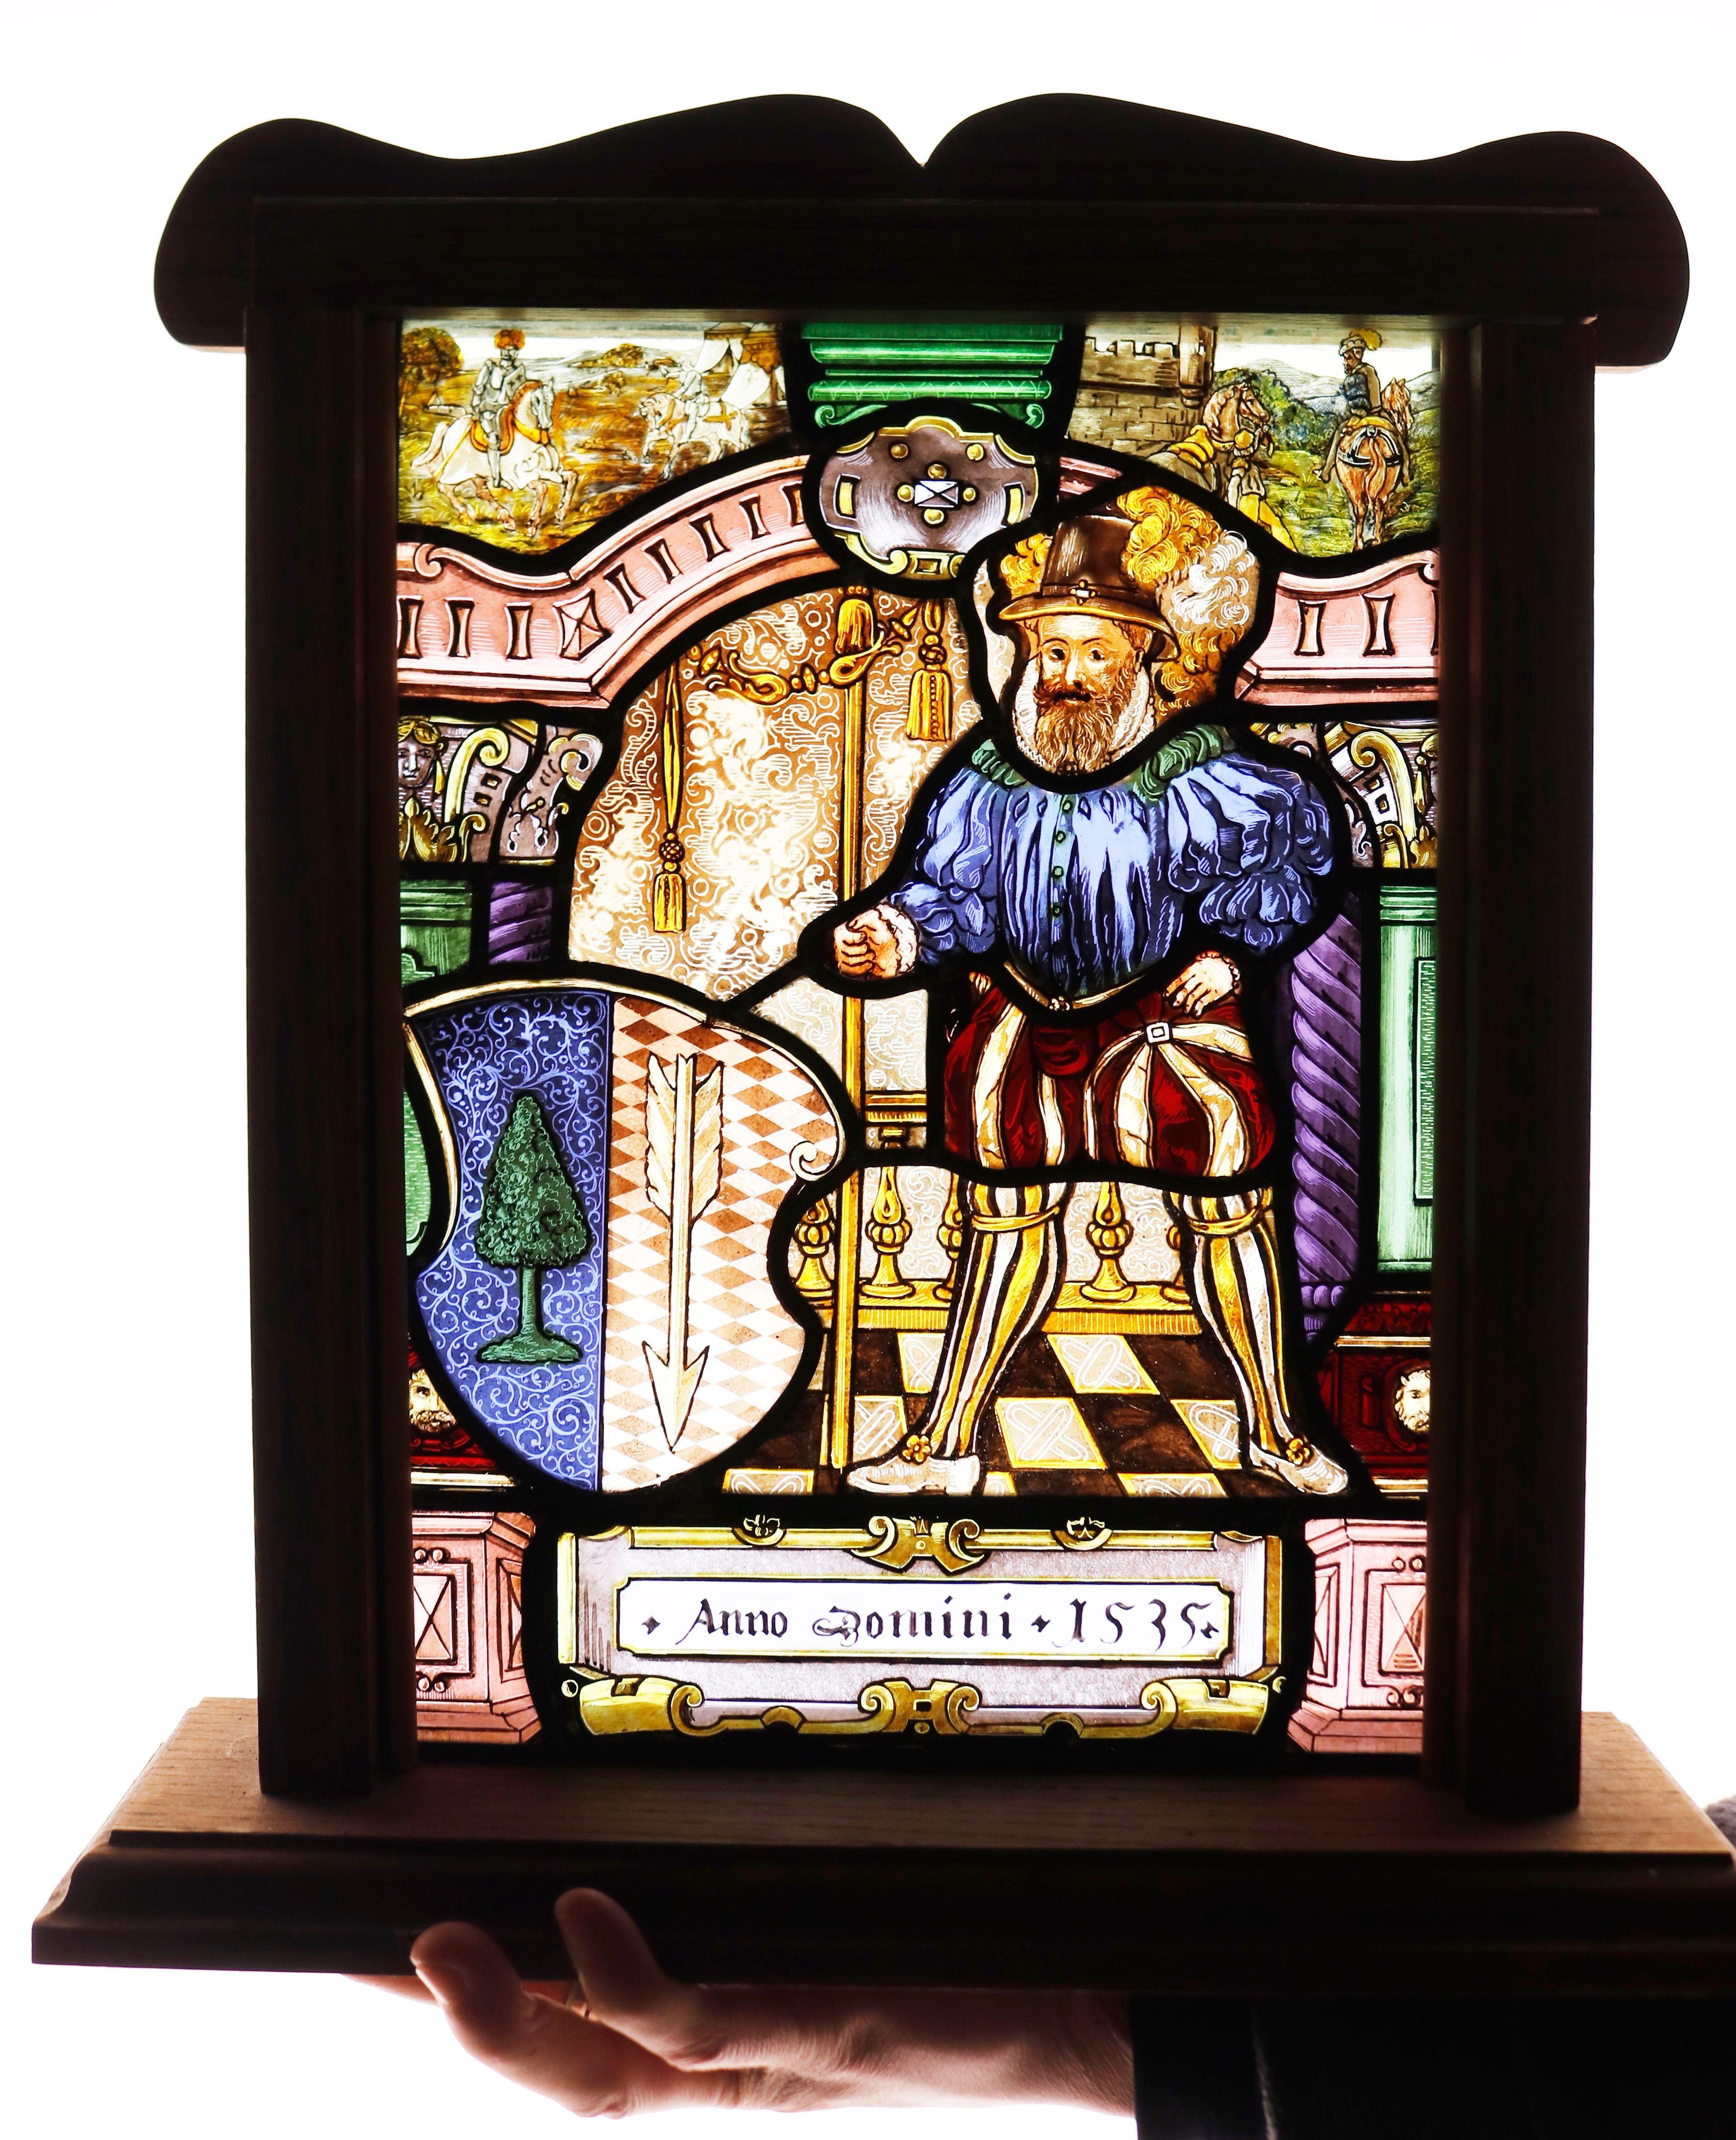 Small Stained Glass Window Panel. A Tudor styled, painted stained glass window.
The piece is dated 1535 but is likely to have been produced in the early 20th century, circa 1920. The stained glass is beautifully vibrant and rich in colour with lots